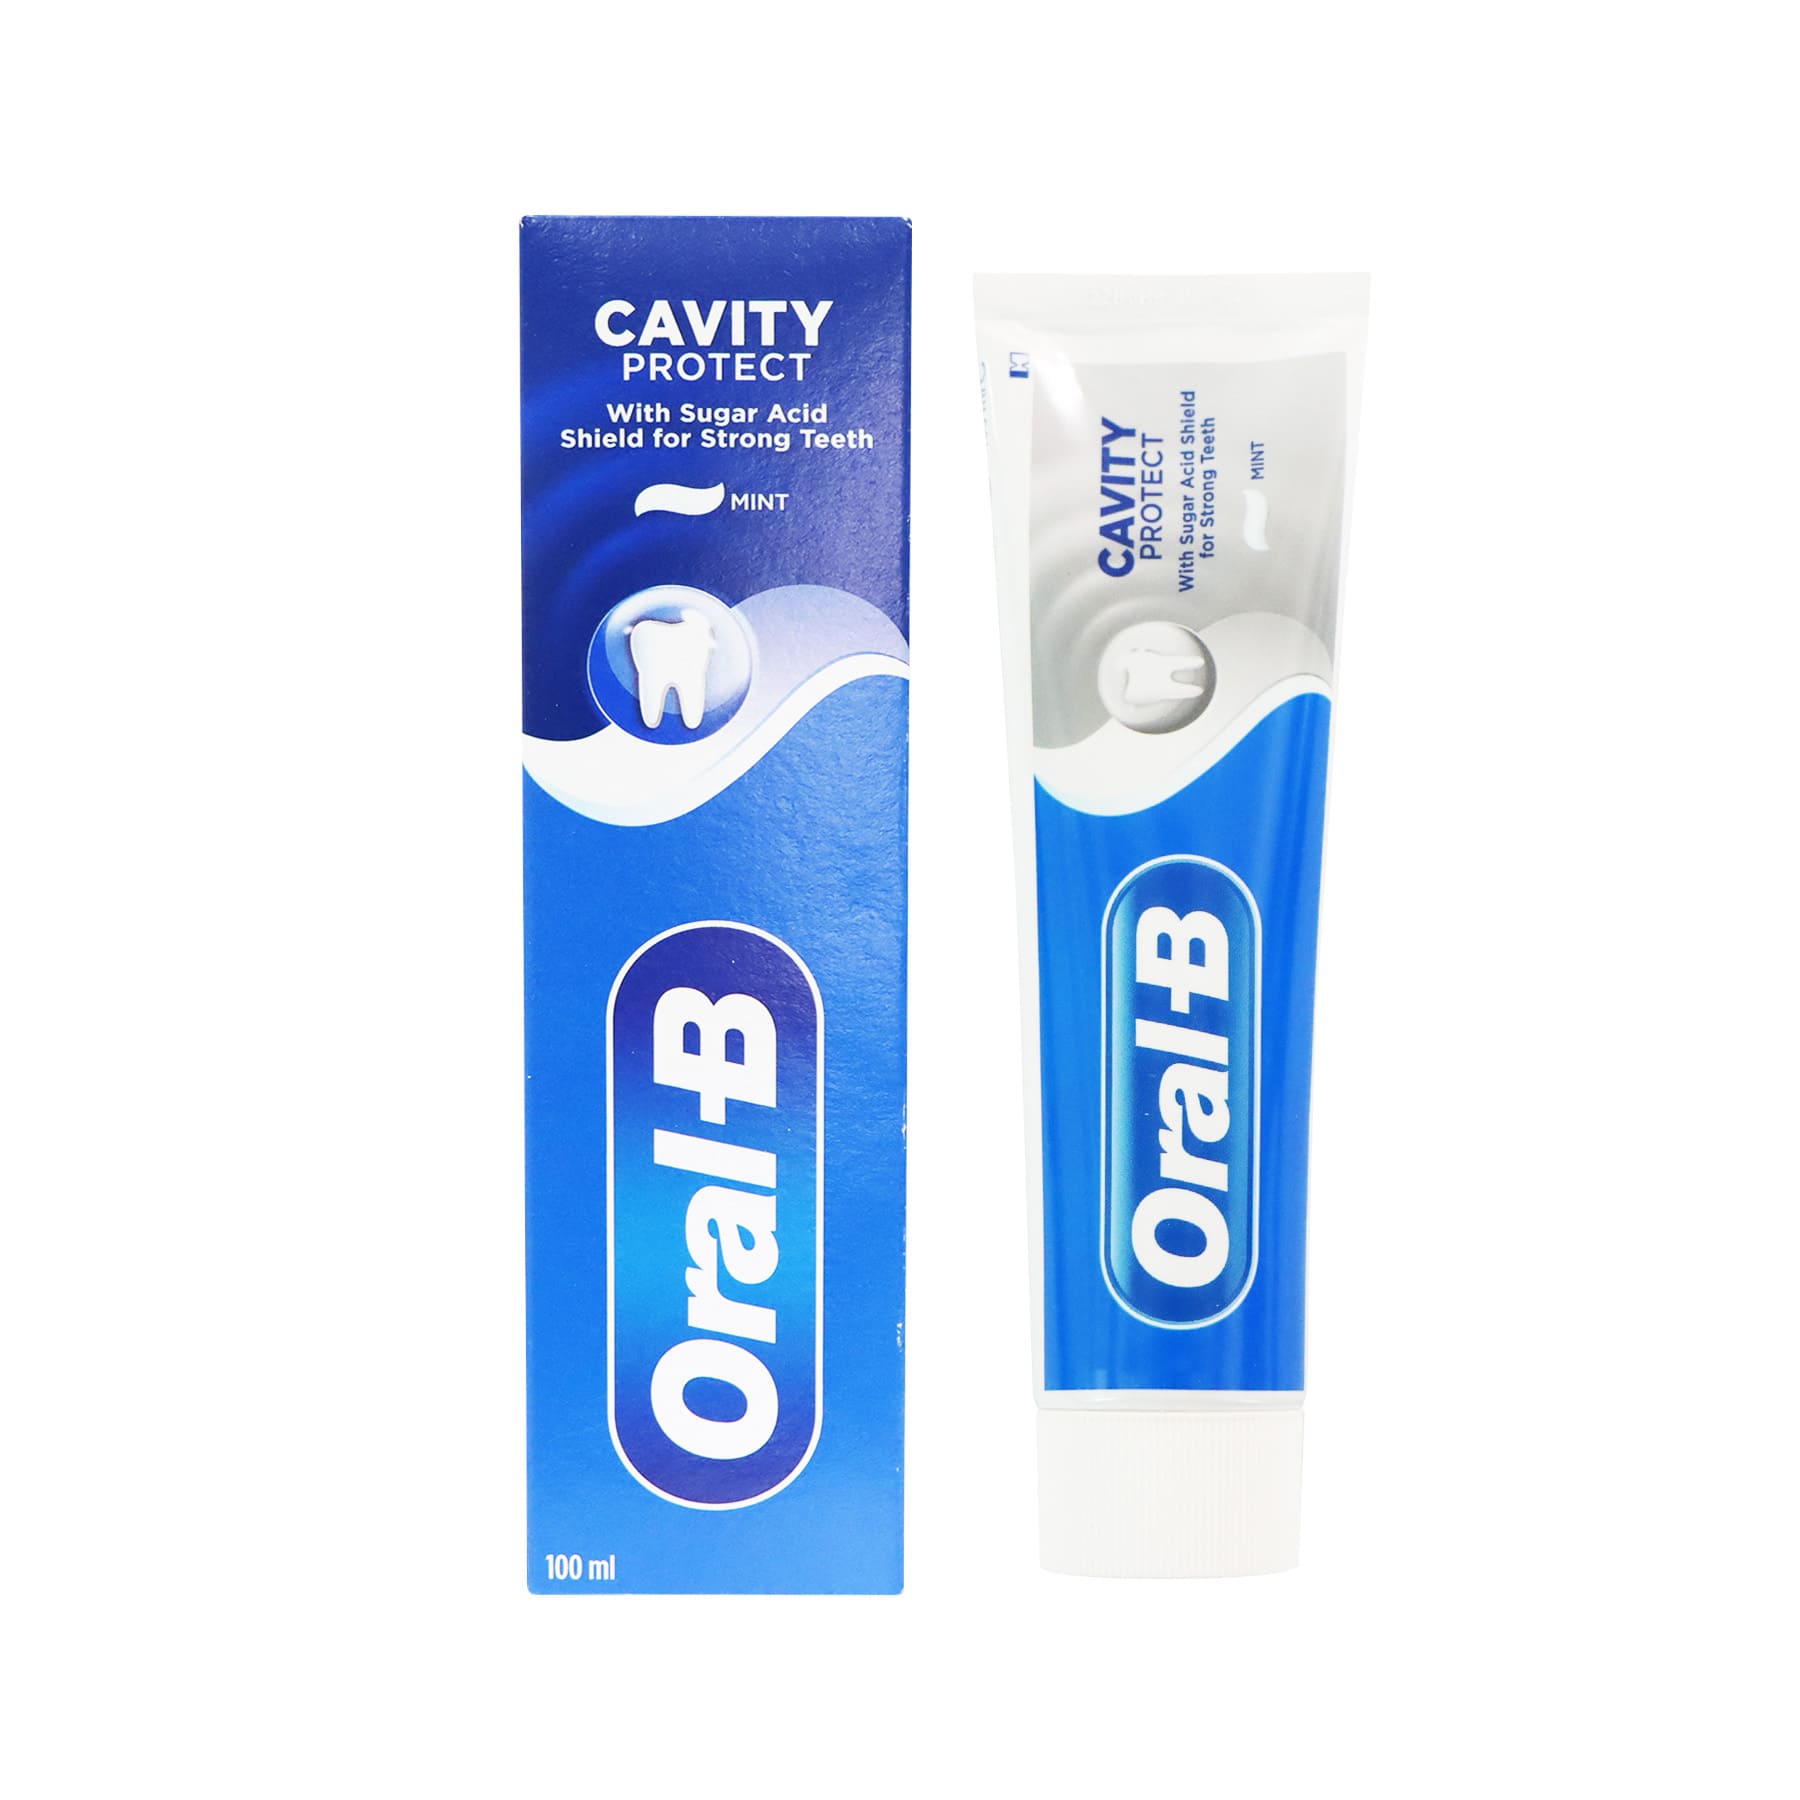 Oral-B Cavity Protection Mint Toothpaste 100 ml